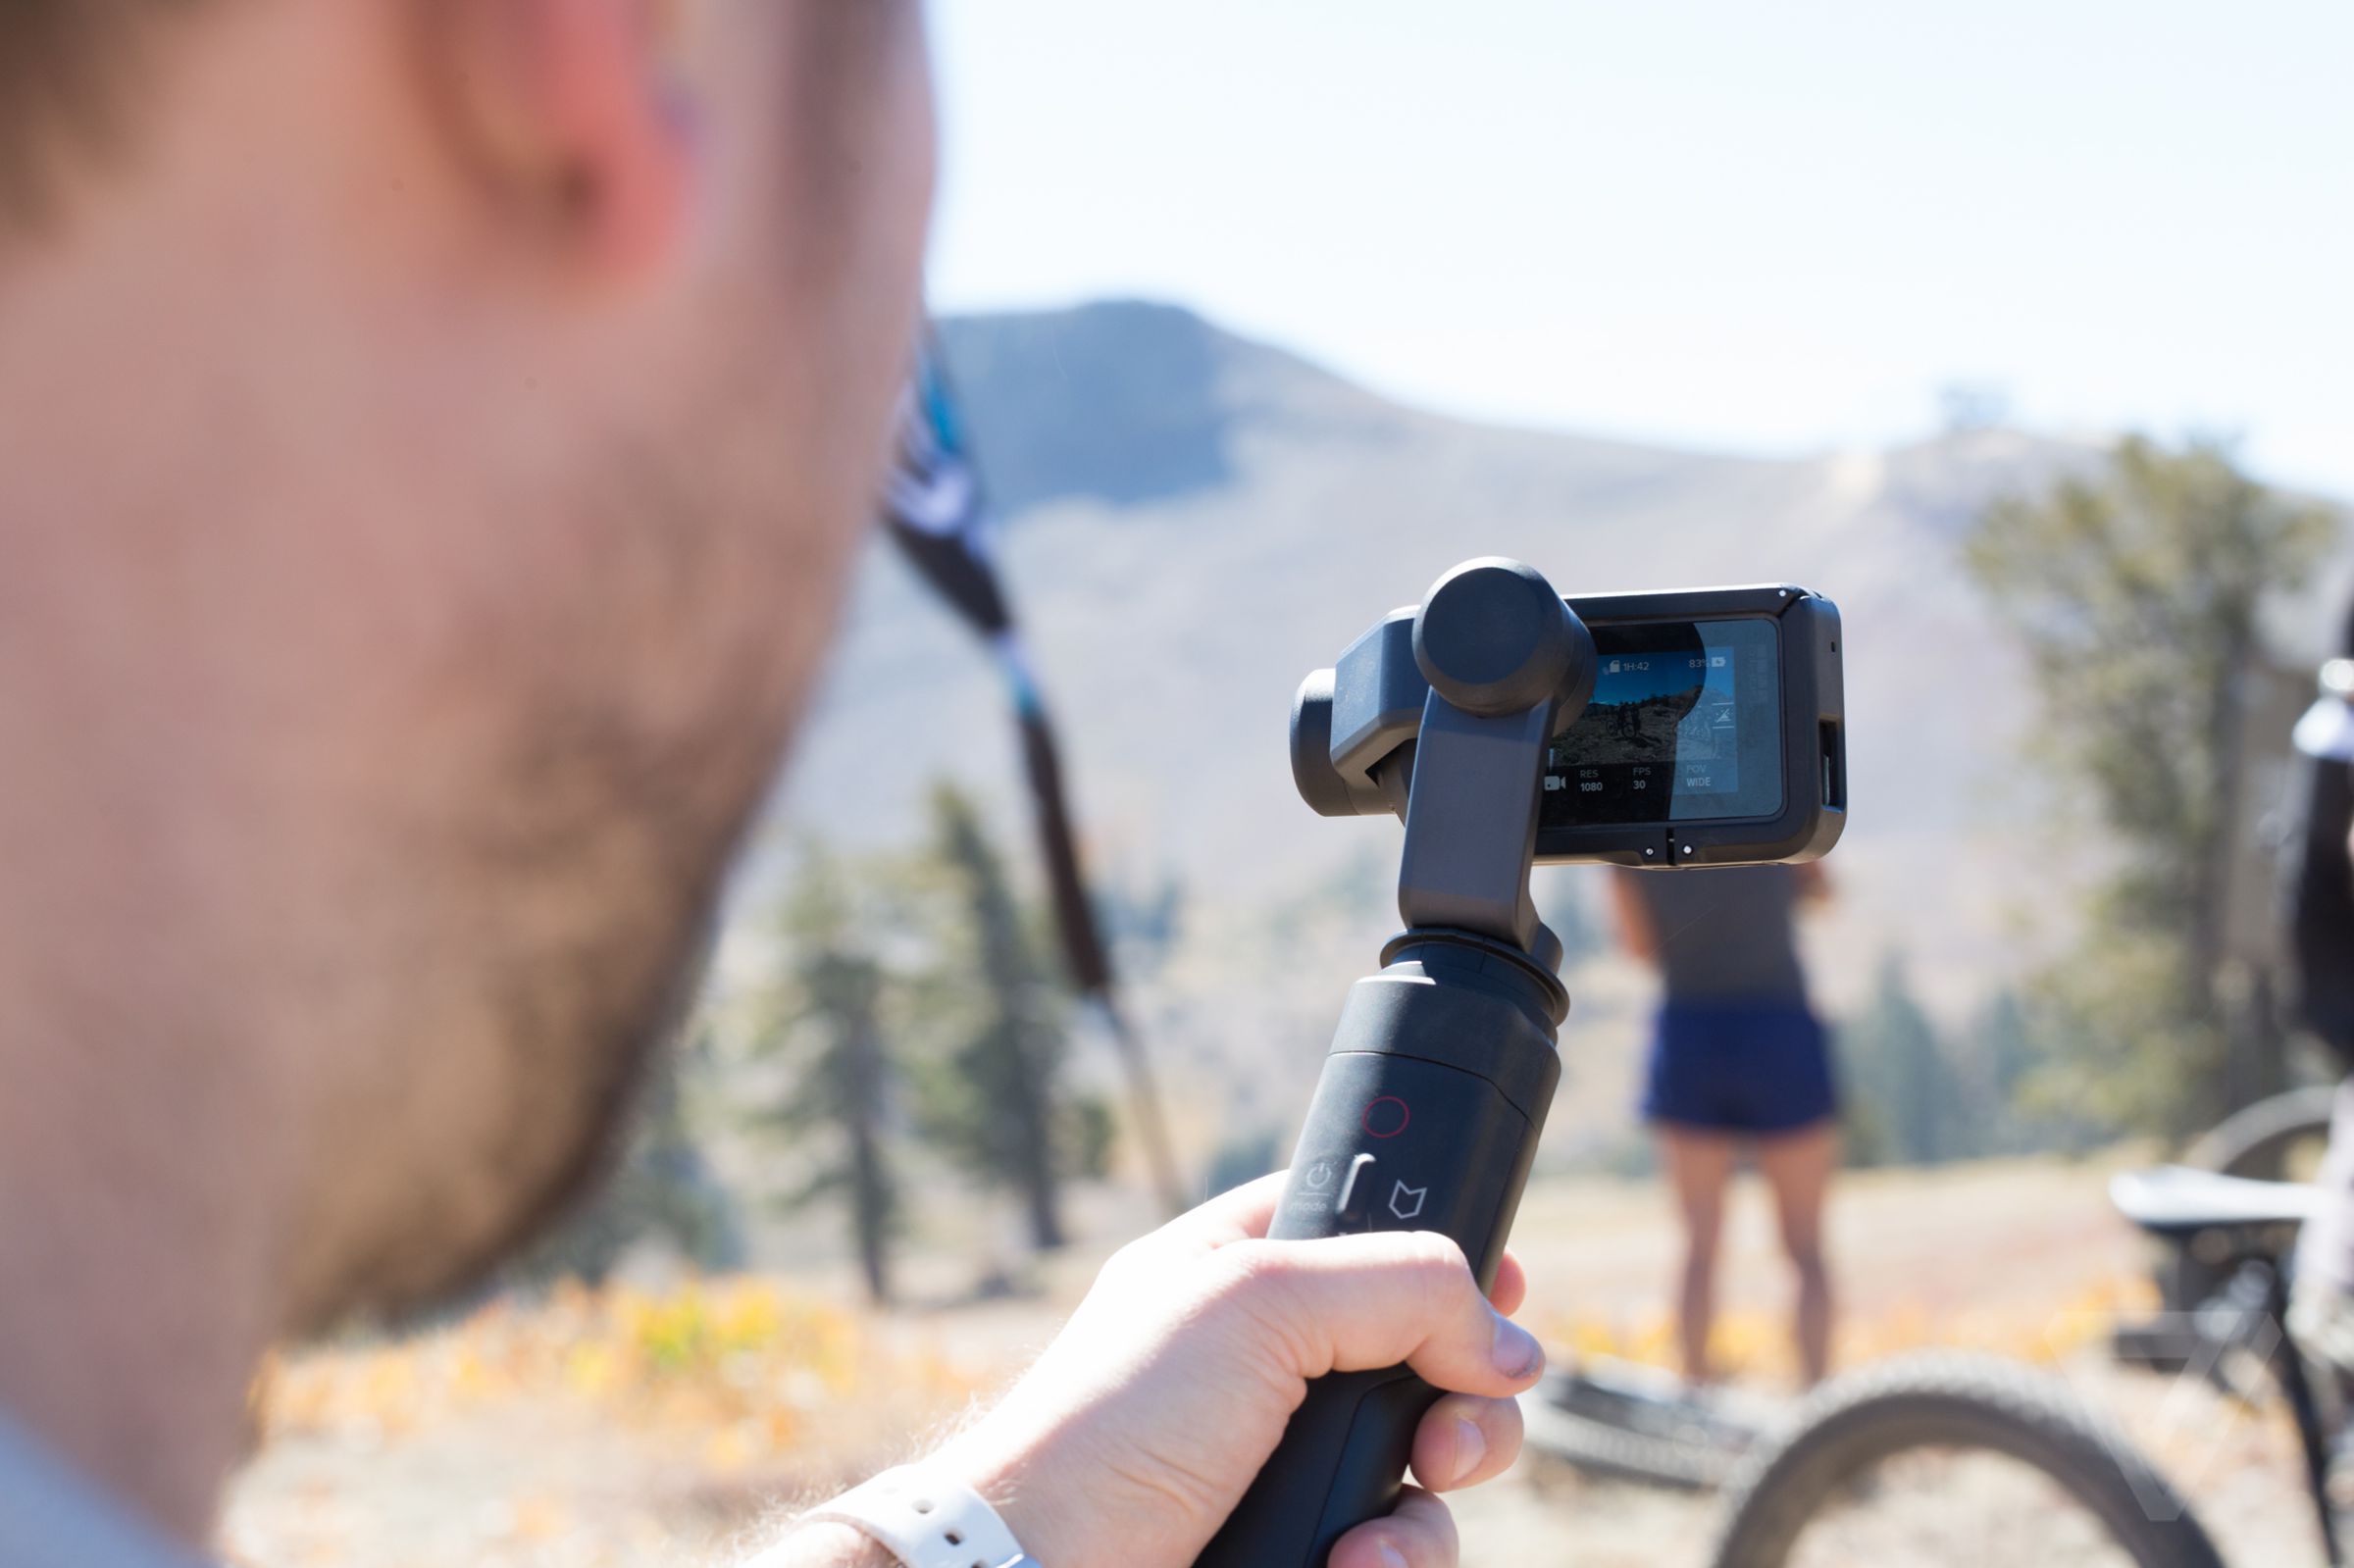 GoPro Karma and stabilizer grip in photos